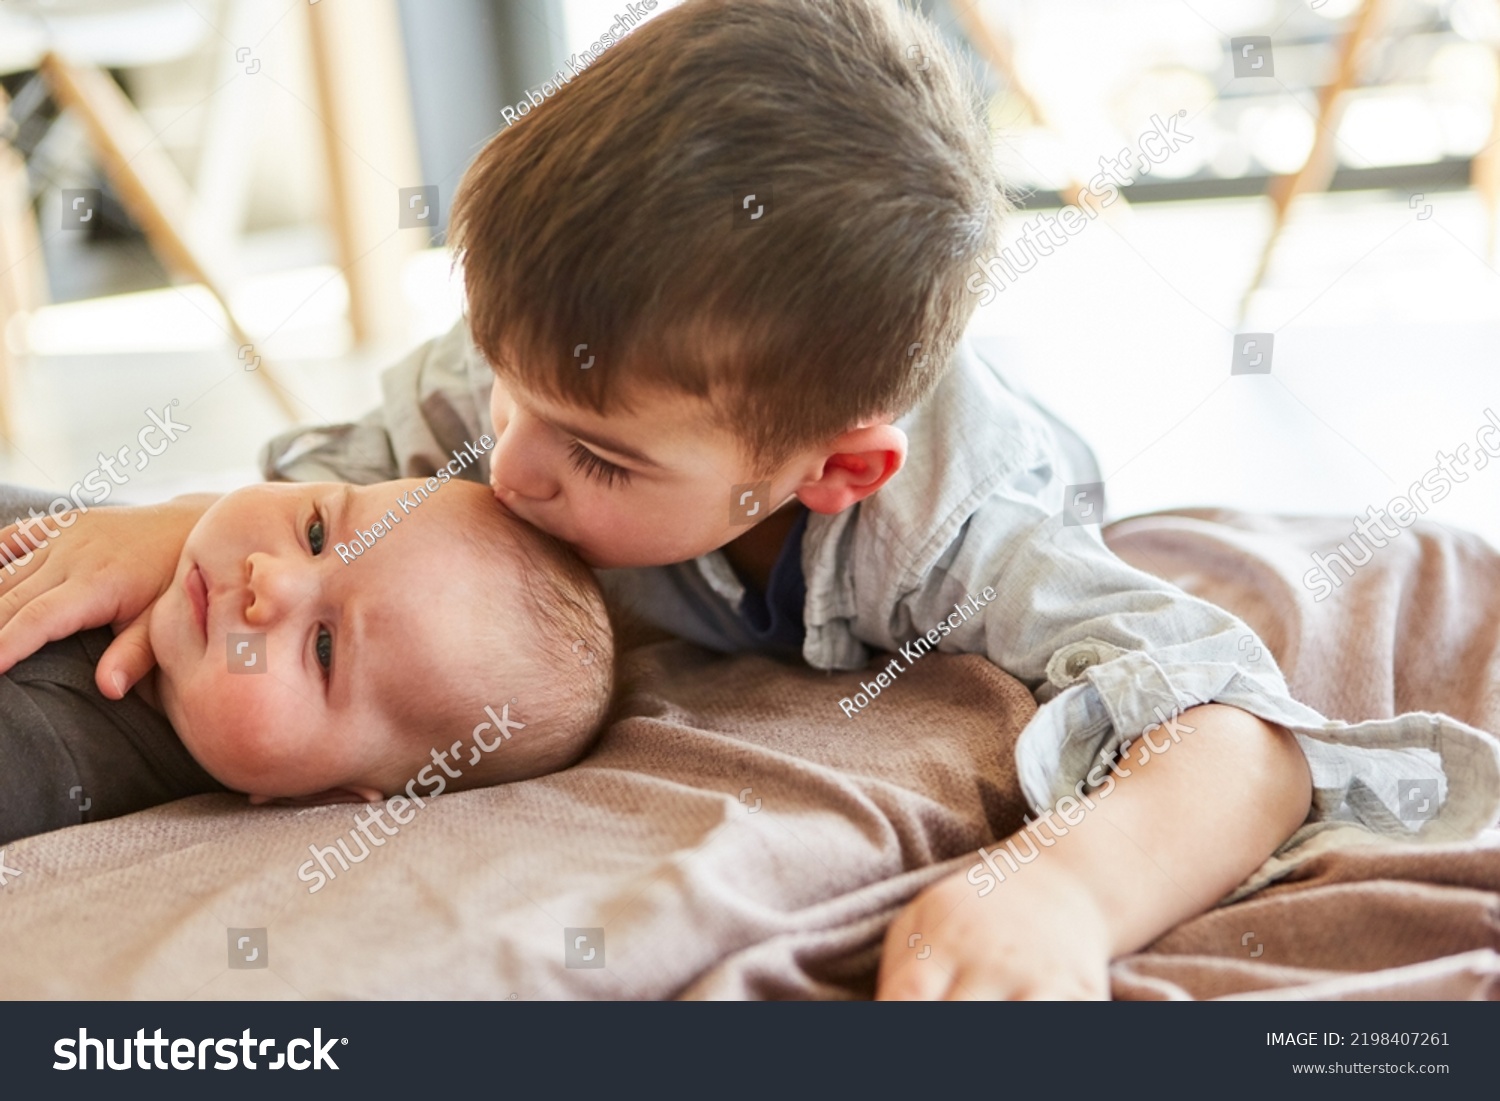 Little boy as big brother gives baby a kiss on the forehead for love and affection #2198407261